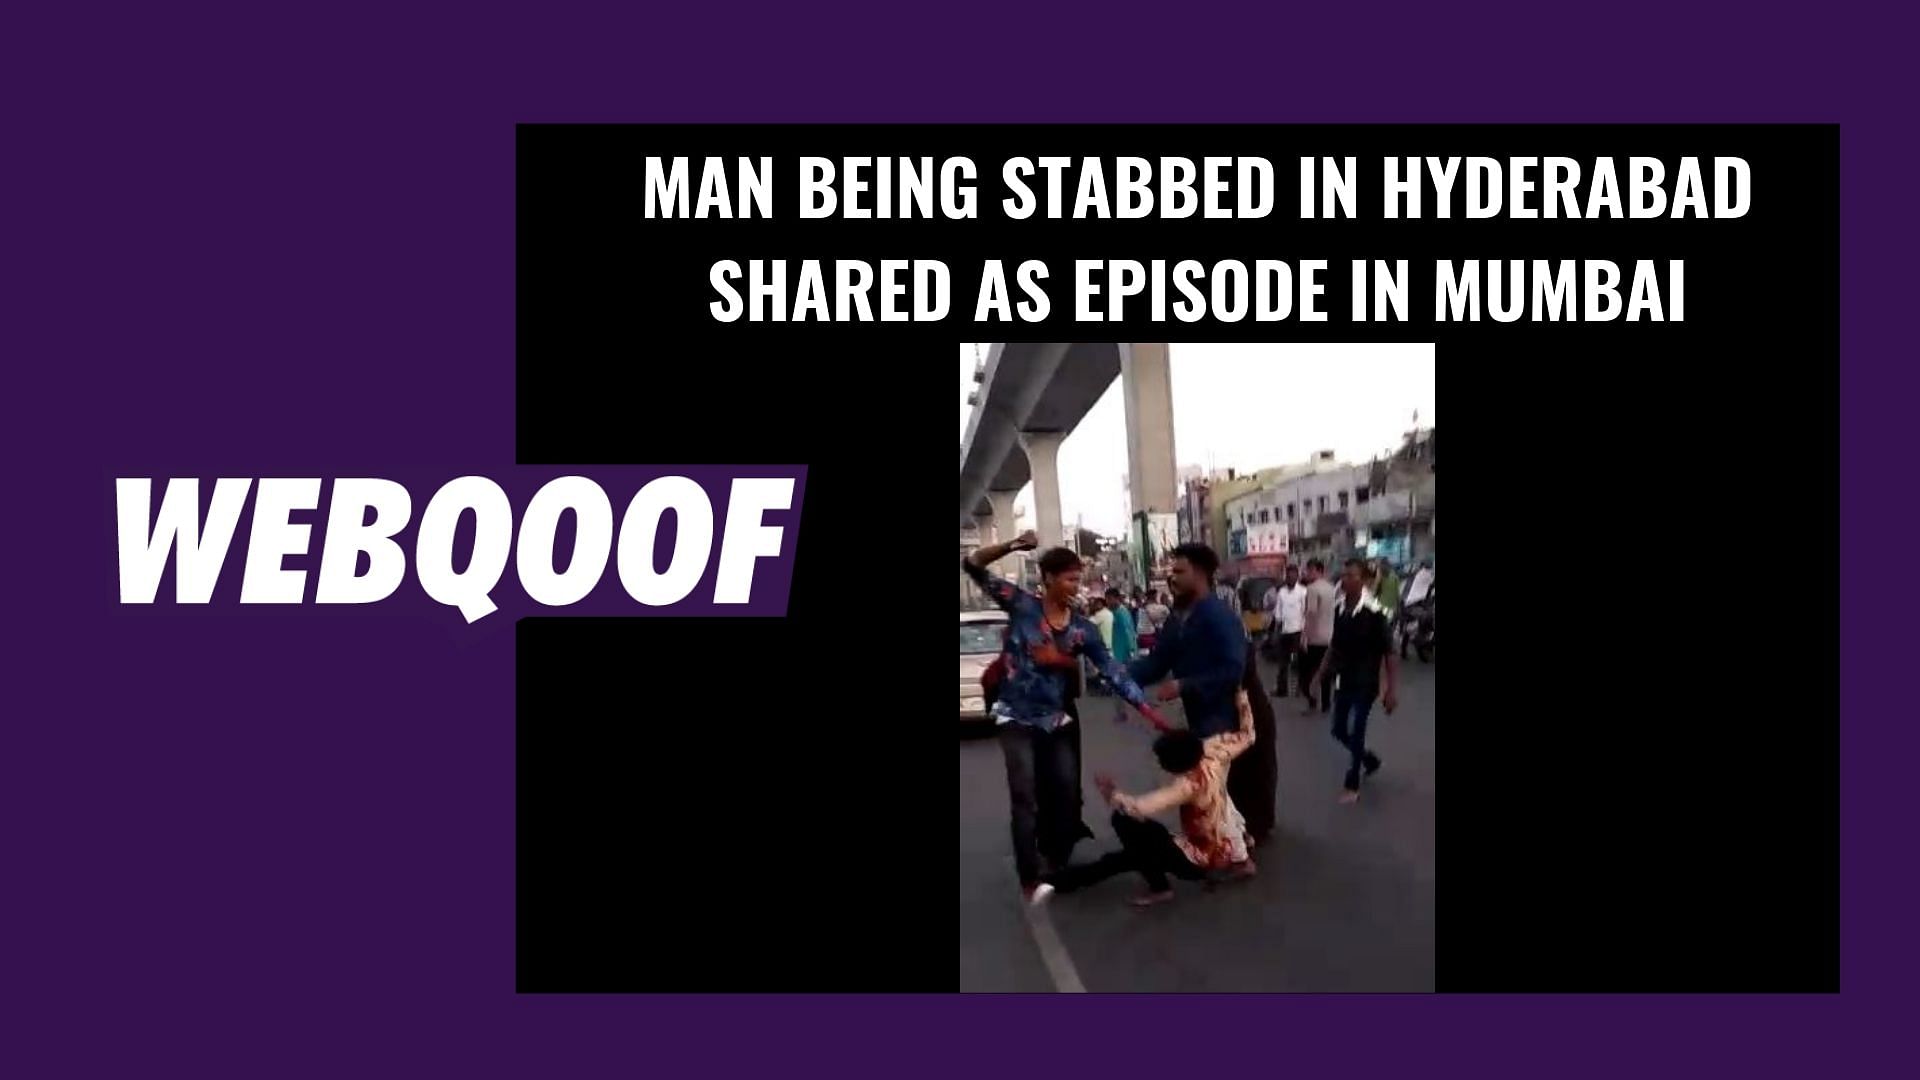 According to reports, the video is of a 23-year-old man who was stabbed by his in-laws in Hyderabad after a dispute.